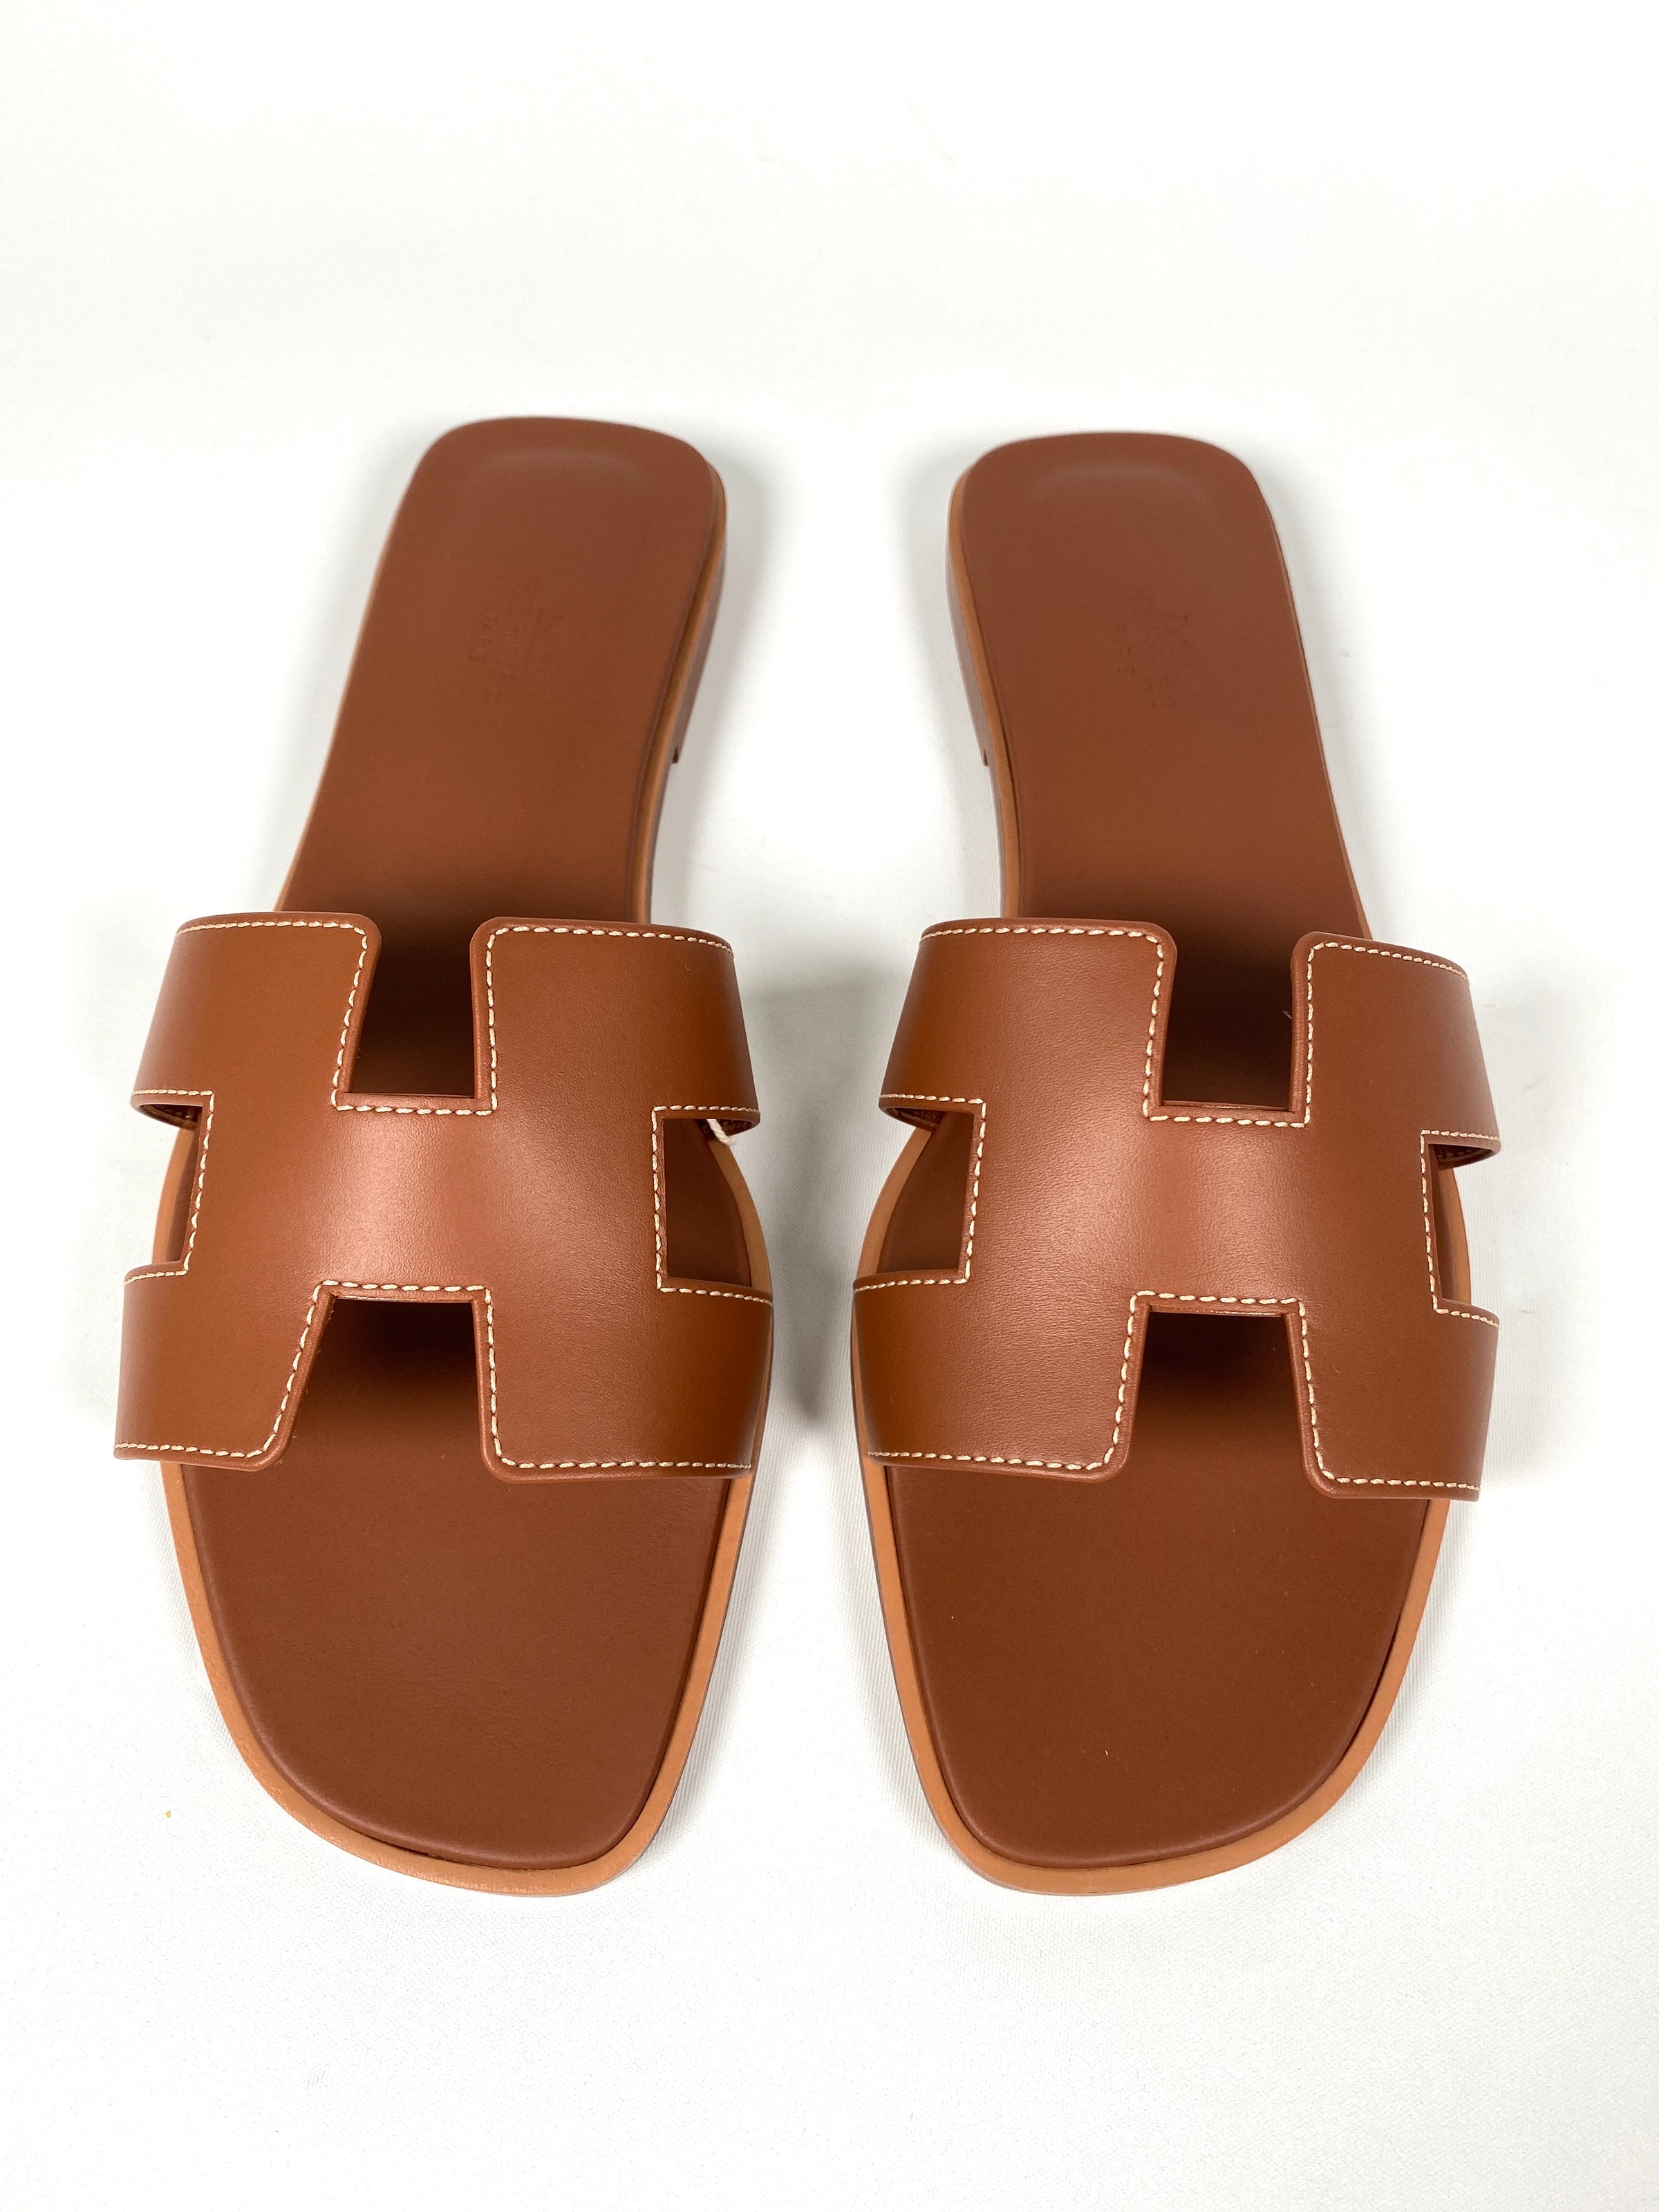 The Hermès Sandals Everyone's Obsessed With Right Now | Who What Wear